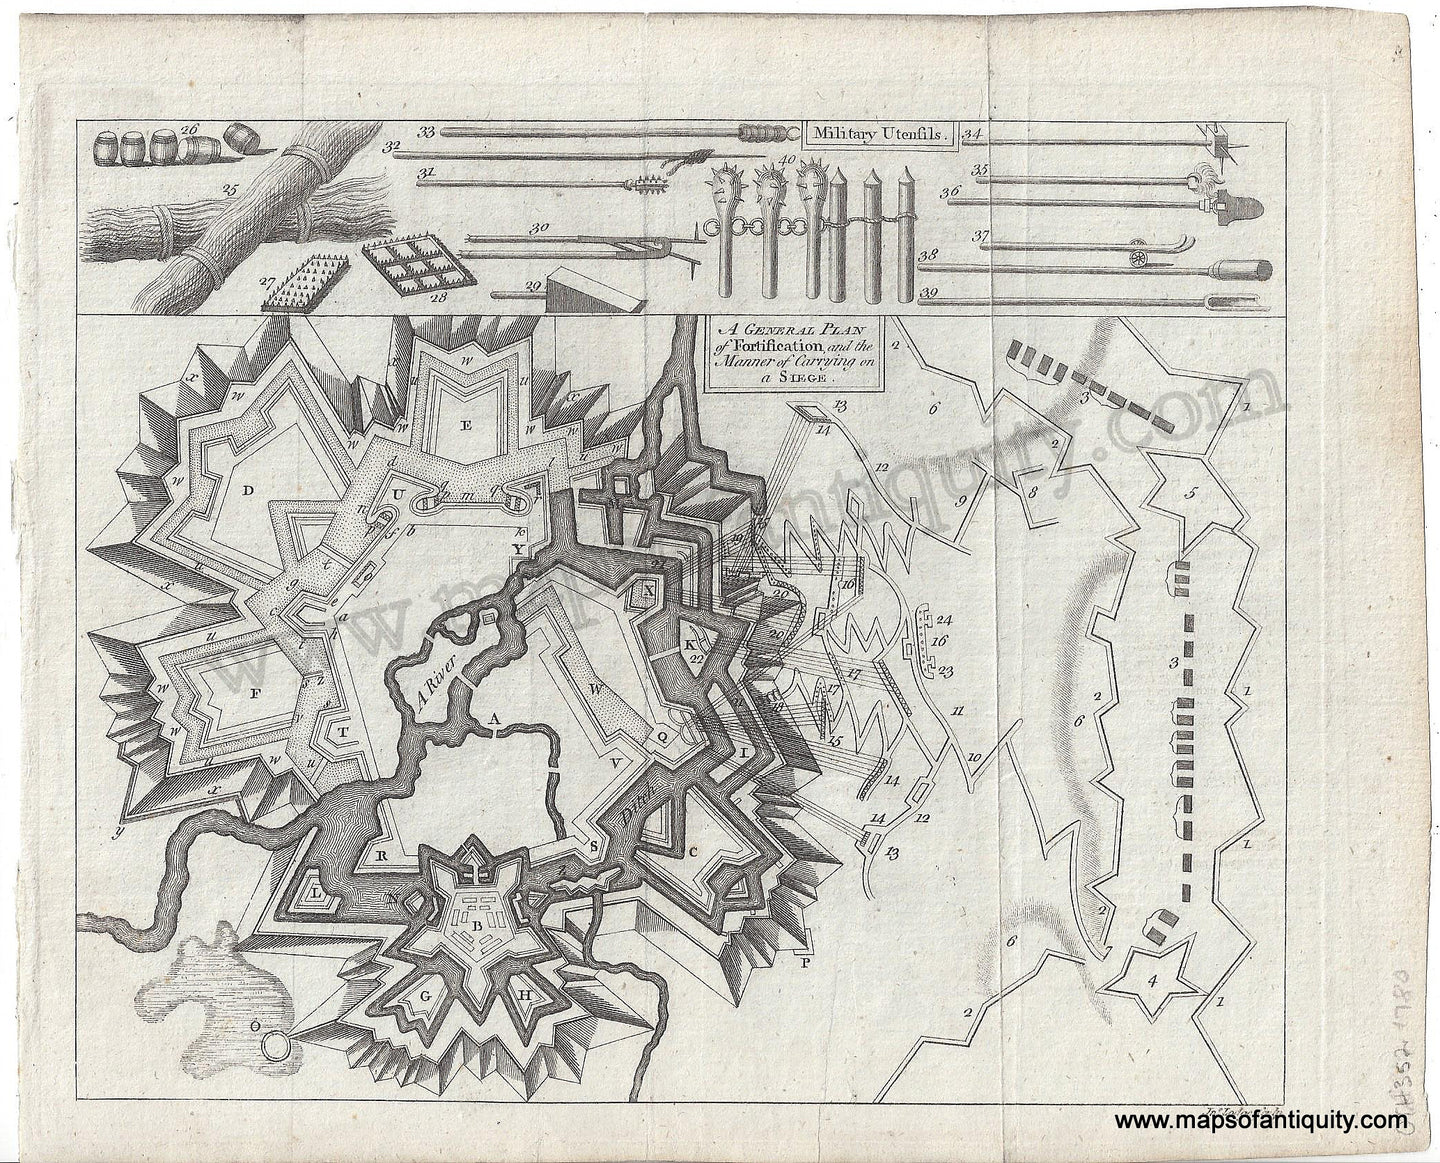 Antique-Print-A-General-Plan-of-Fortification-and-the-Manner-of-Carrying-on-a-Siege-1780-Lodge-/-Political-Magazine-1700s-18th-century-Maps-of-Antiquity